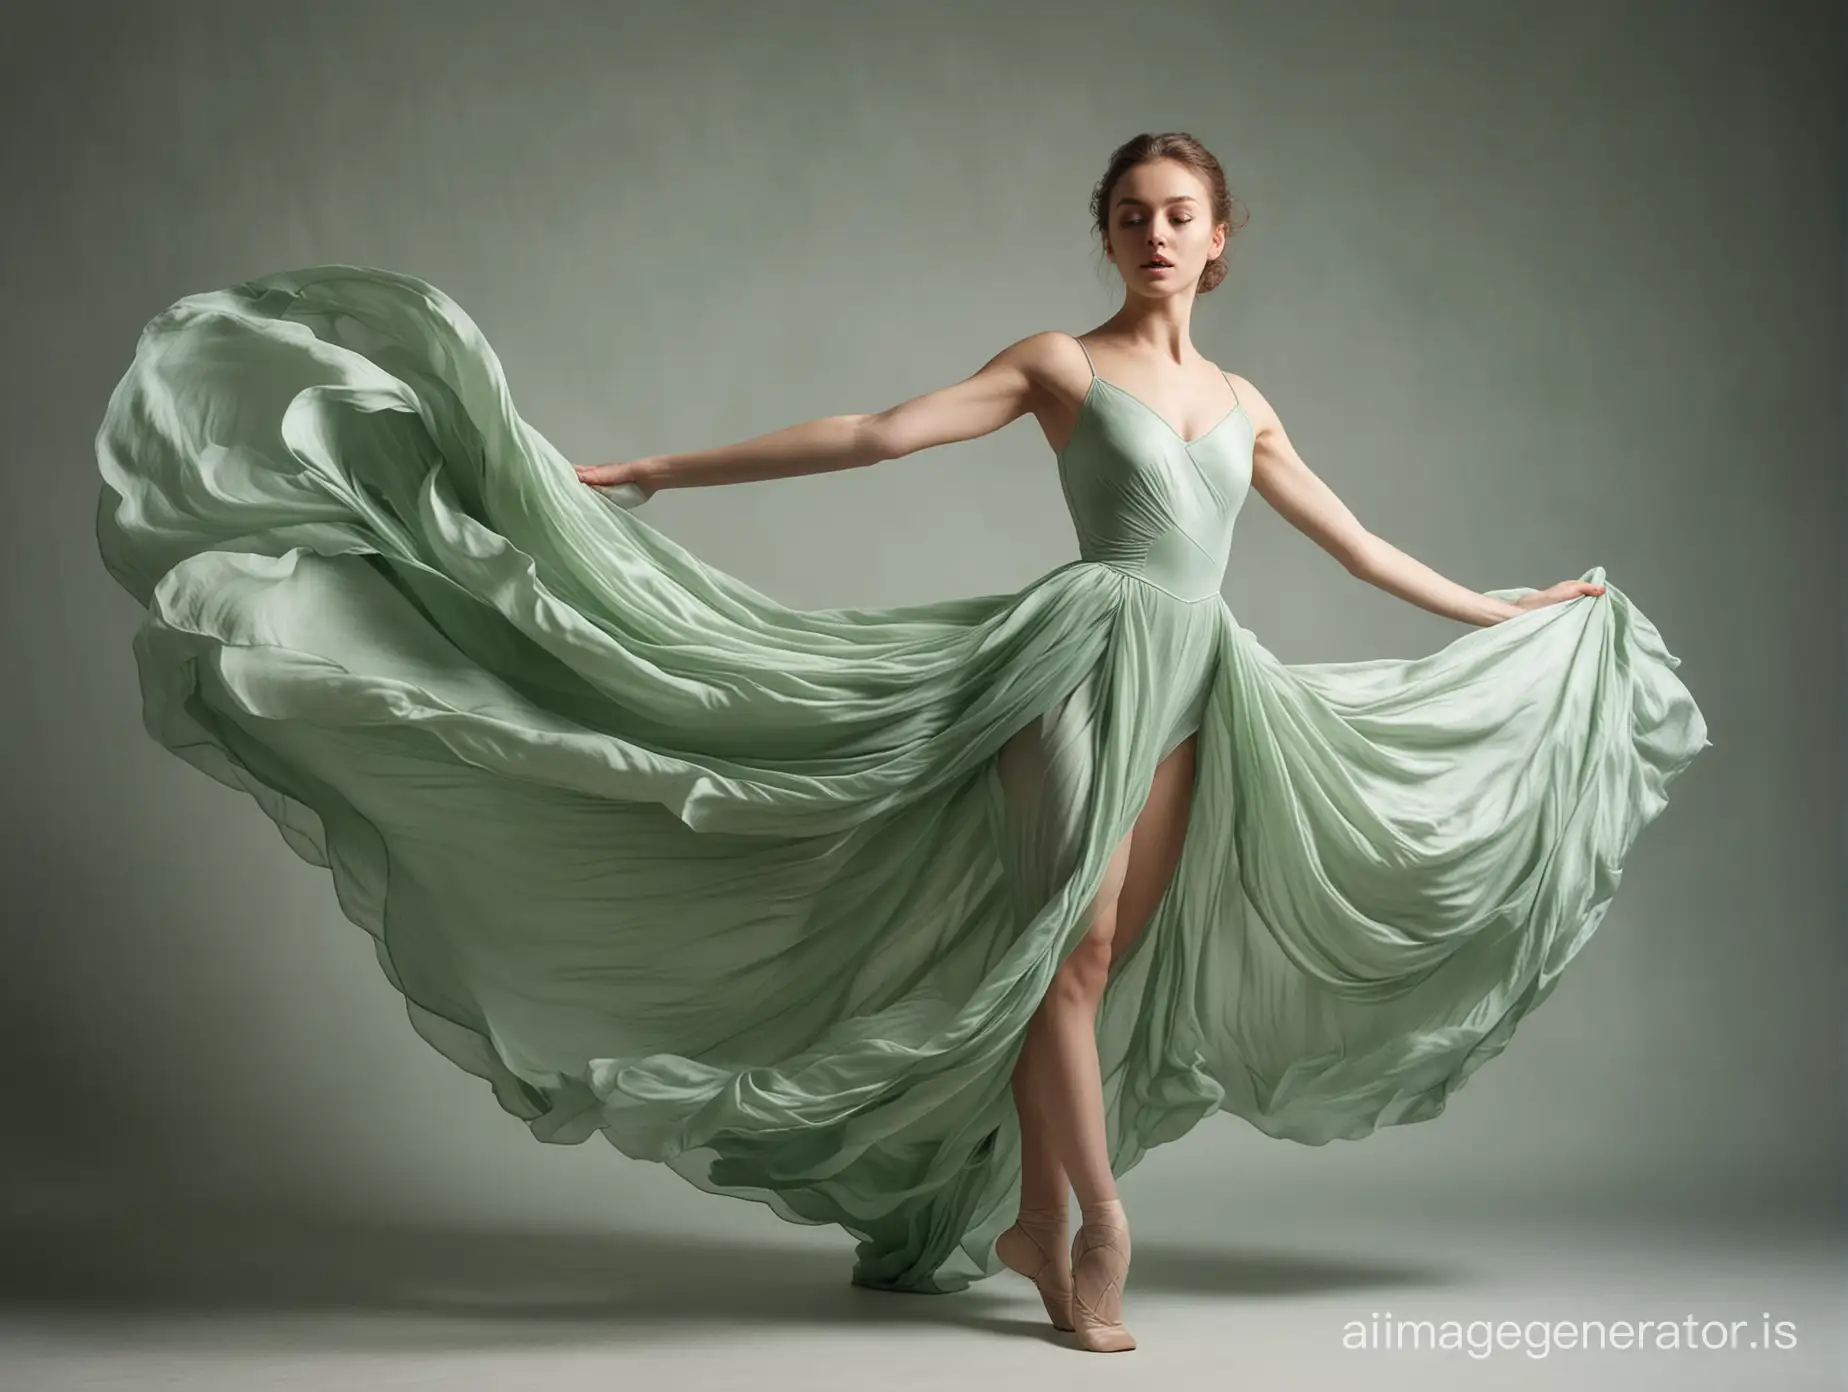 A young beautiful ballerina in a ballet jump grand jete, splits in the air, full height, wearing a long dress, muse of art, surrounded by a large amount of flowing silk fabric of a tender green color, the fabric surrounds her from all sides, she seems to be bathing in the folds of the fabric, complex folds, dynamic pose, primary energy, high resolution, fashion photoshoot, Laocoön, complex lighting